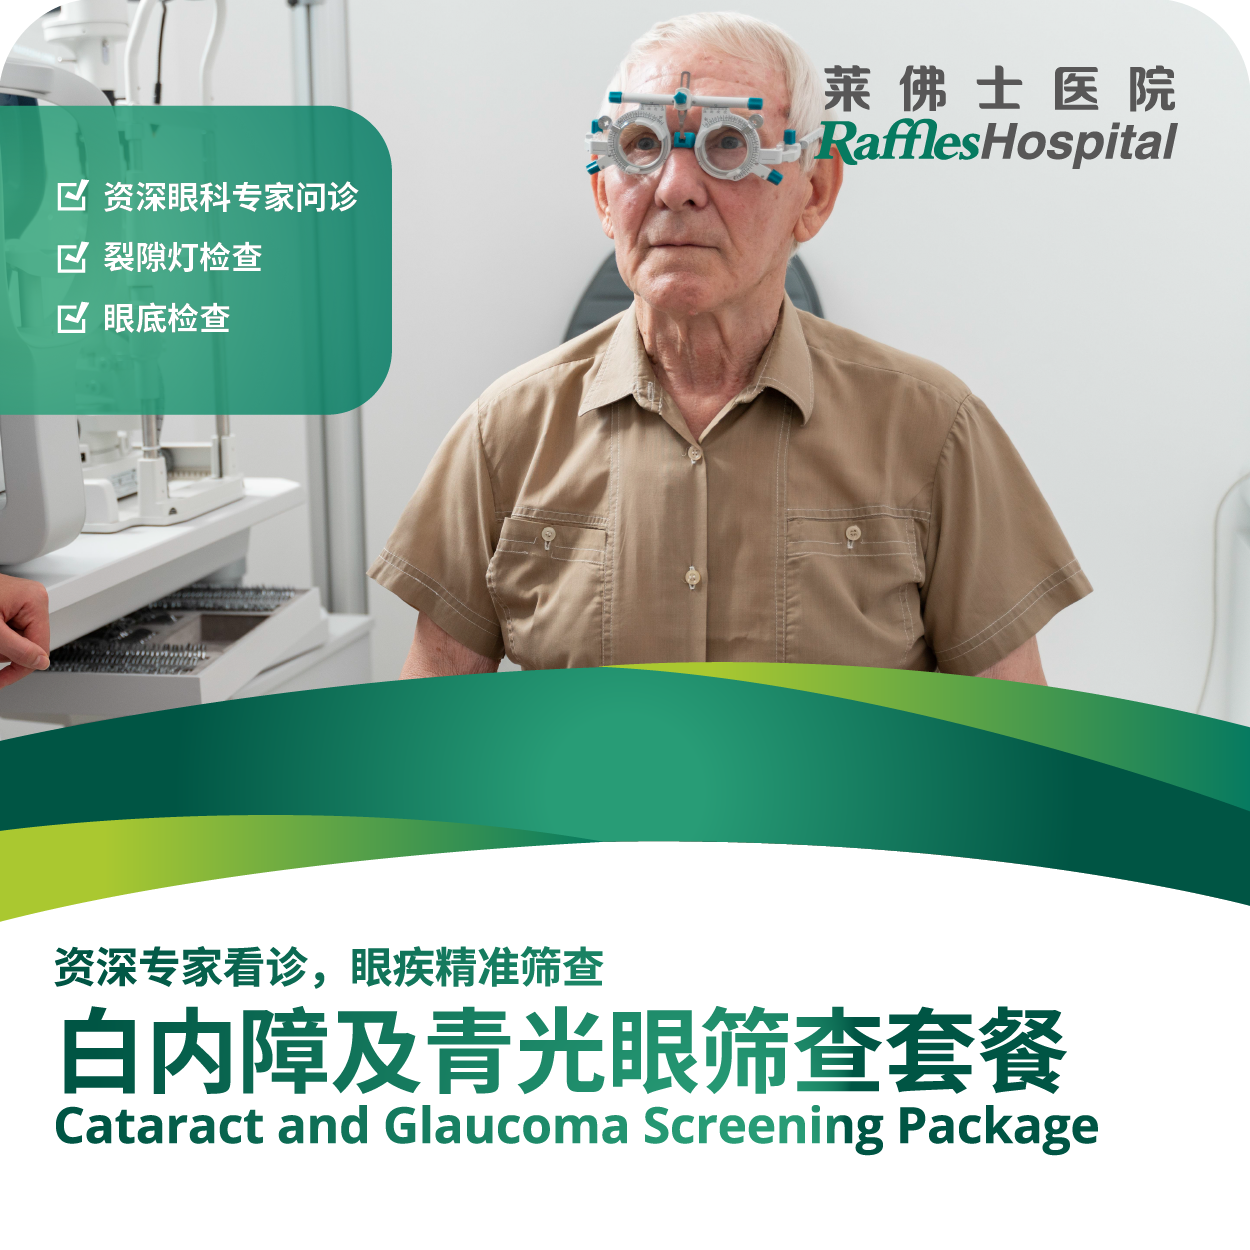 Raffles Hospital Beijing - Special Offer Packages - Cataract and Glaucoma Screening Package